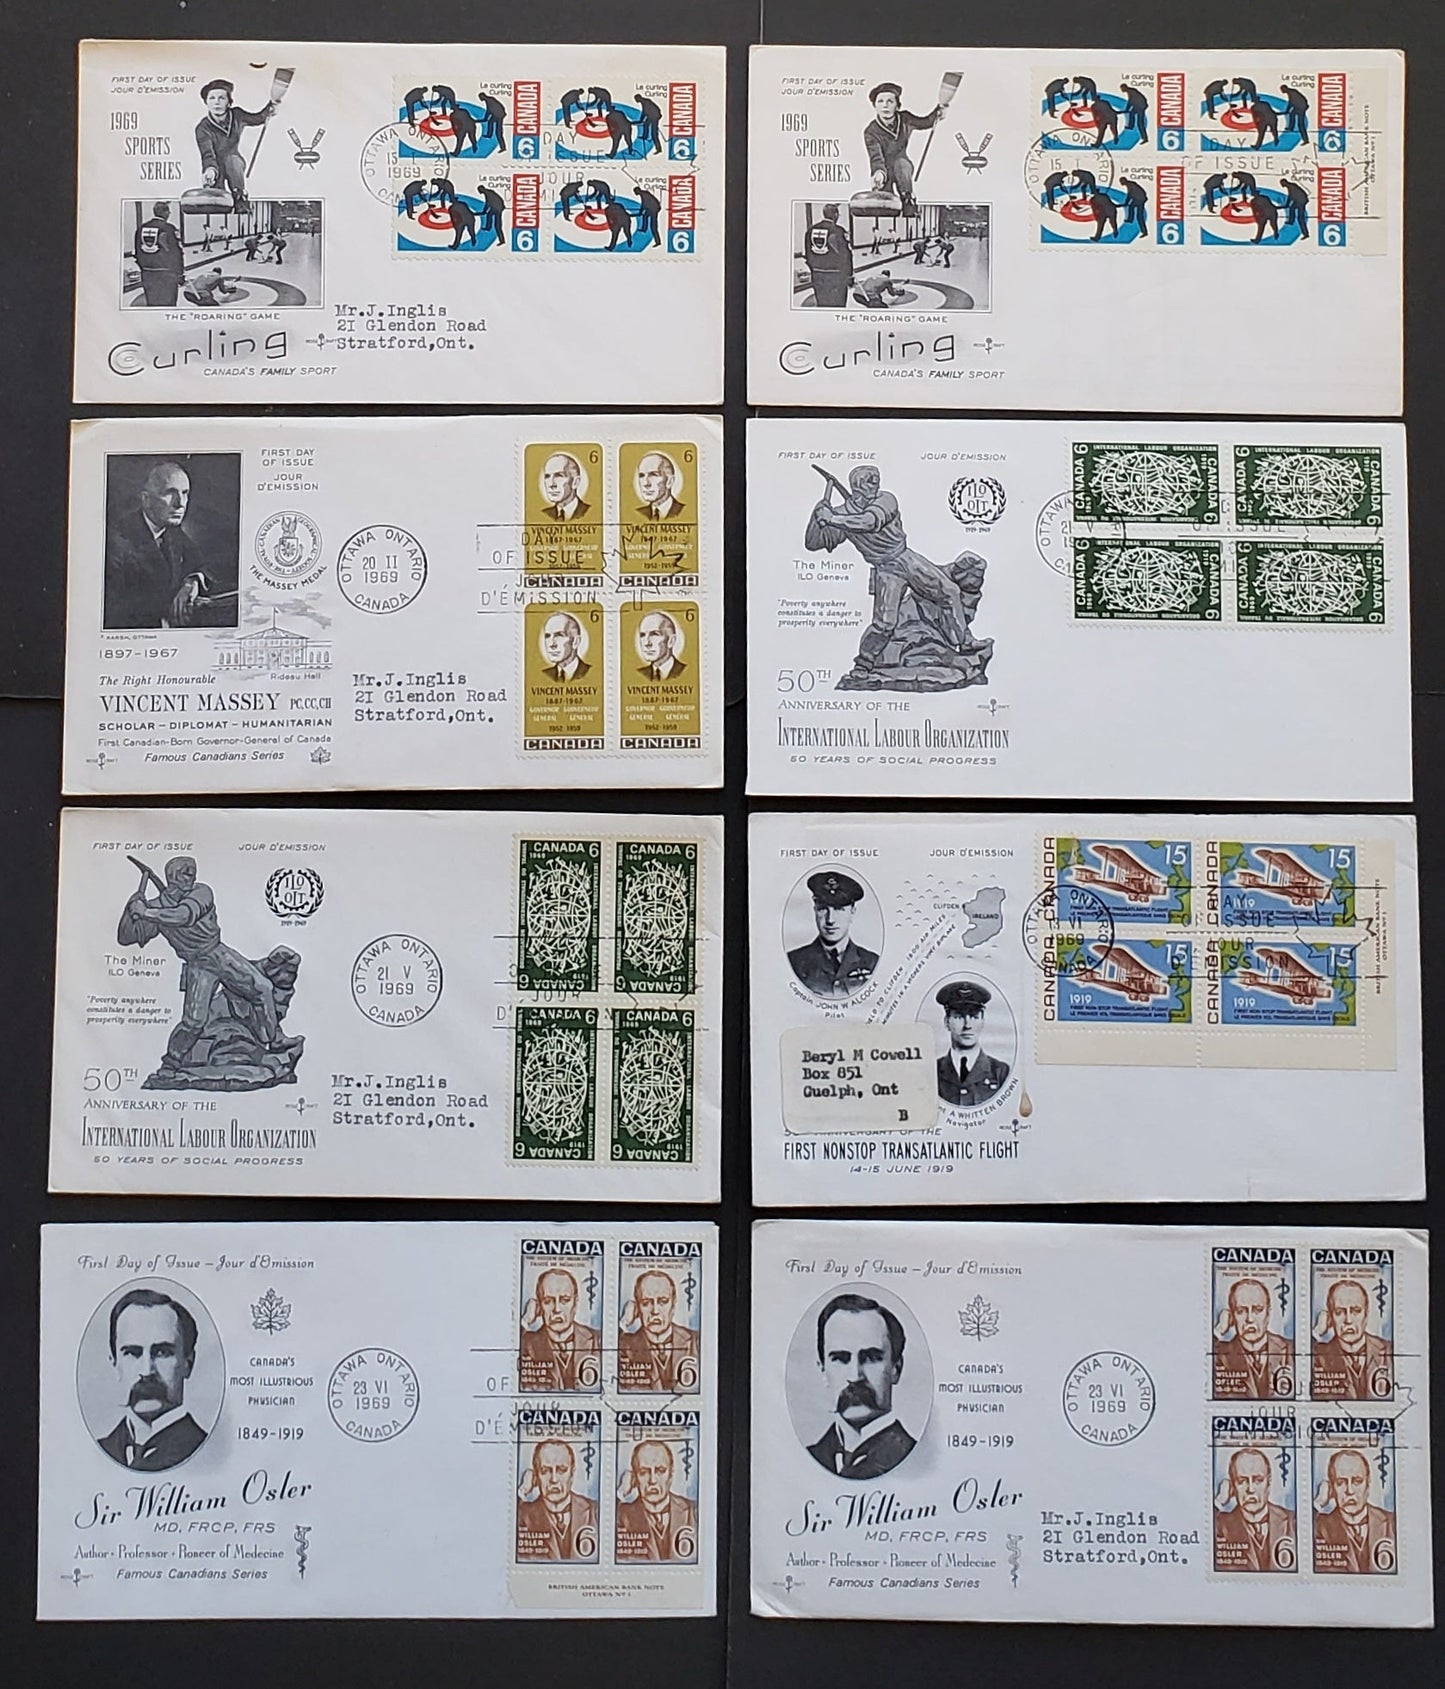 Lot 92 Canada #490-491, 493-i, 494, 495-i 6c-50c Multicolored Various Subjects 1969 Commemoratives, 10 Rosecraft FDC's Franked With Singles, LF-fl, DF, HB Papers,  One Addressed, Cat. Value $27.75